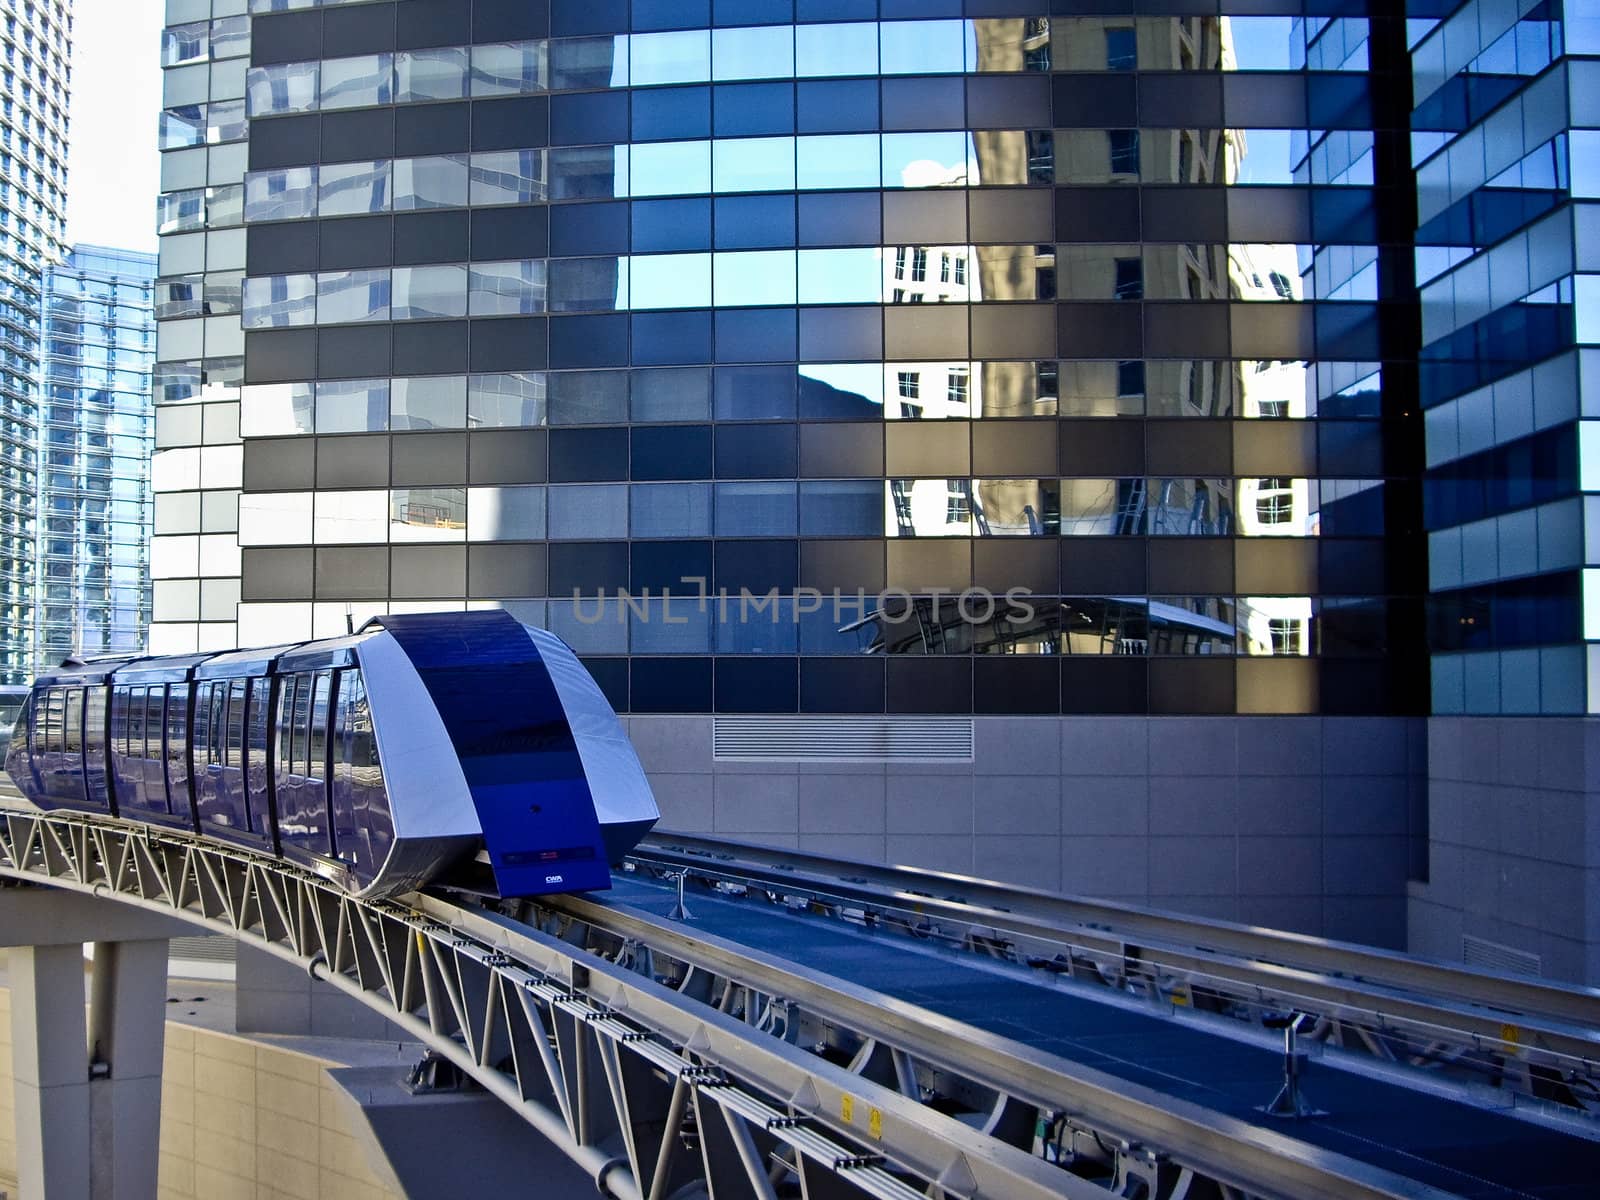 Monorail tram reflects buildings  by emattil